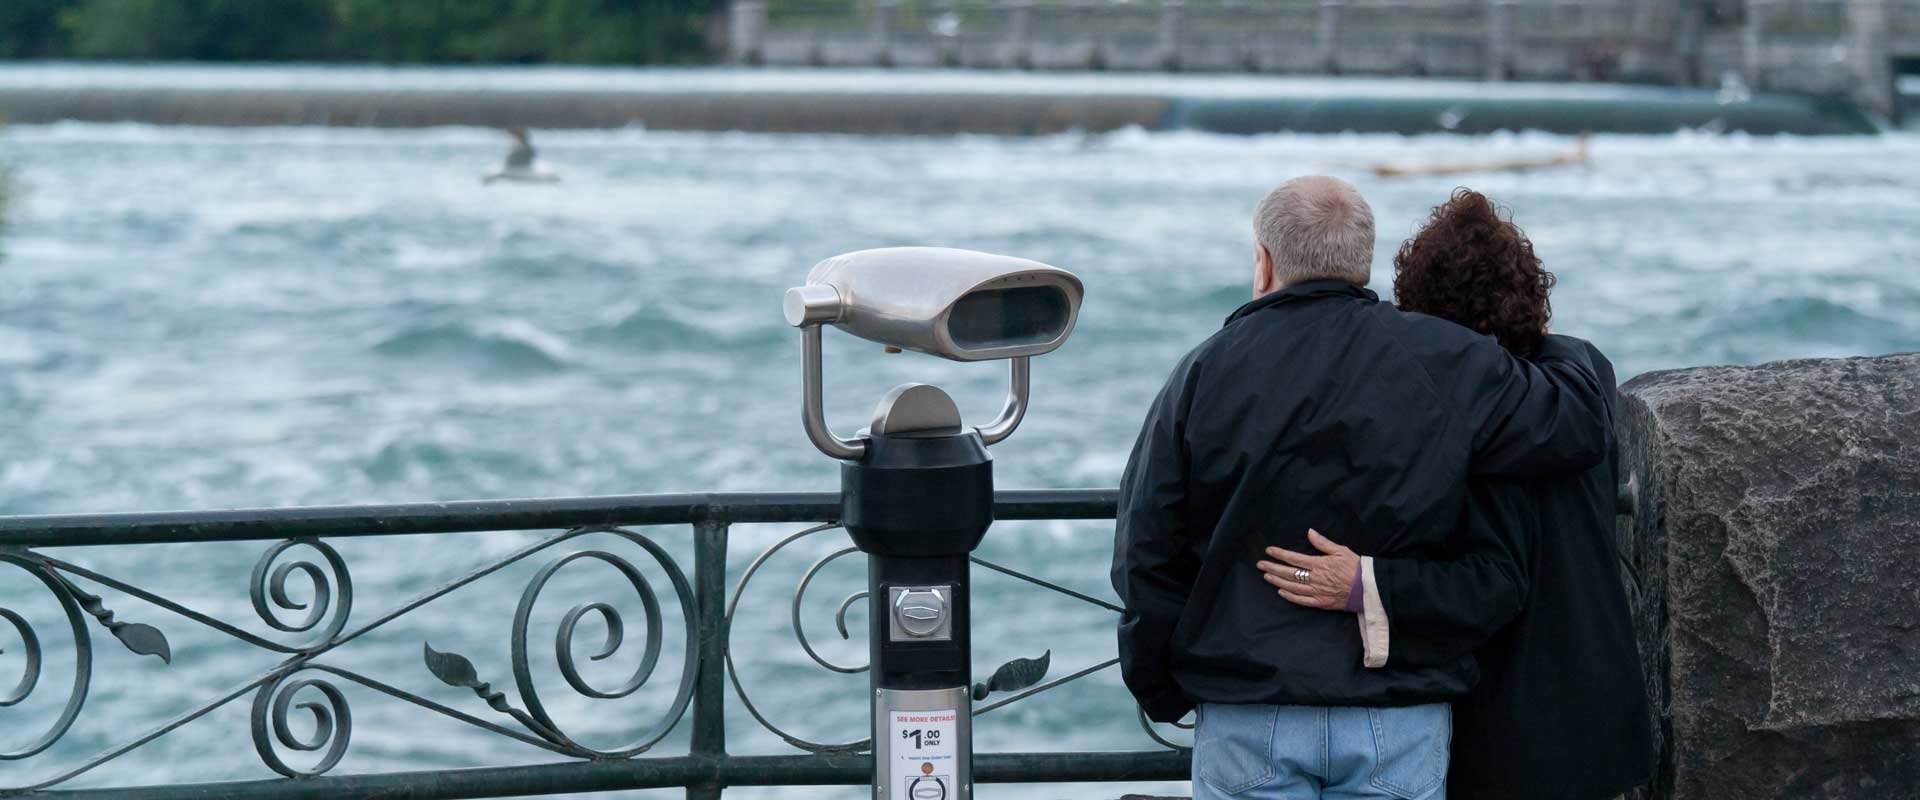 THINGS TO DO IN NIAGARA FALLS FOR COUPLES